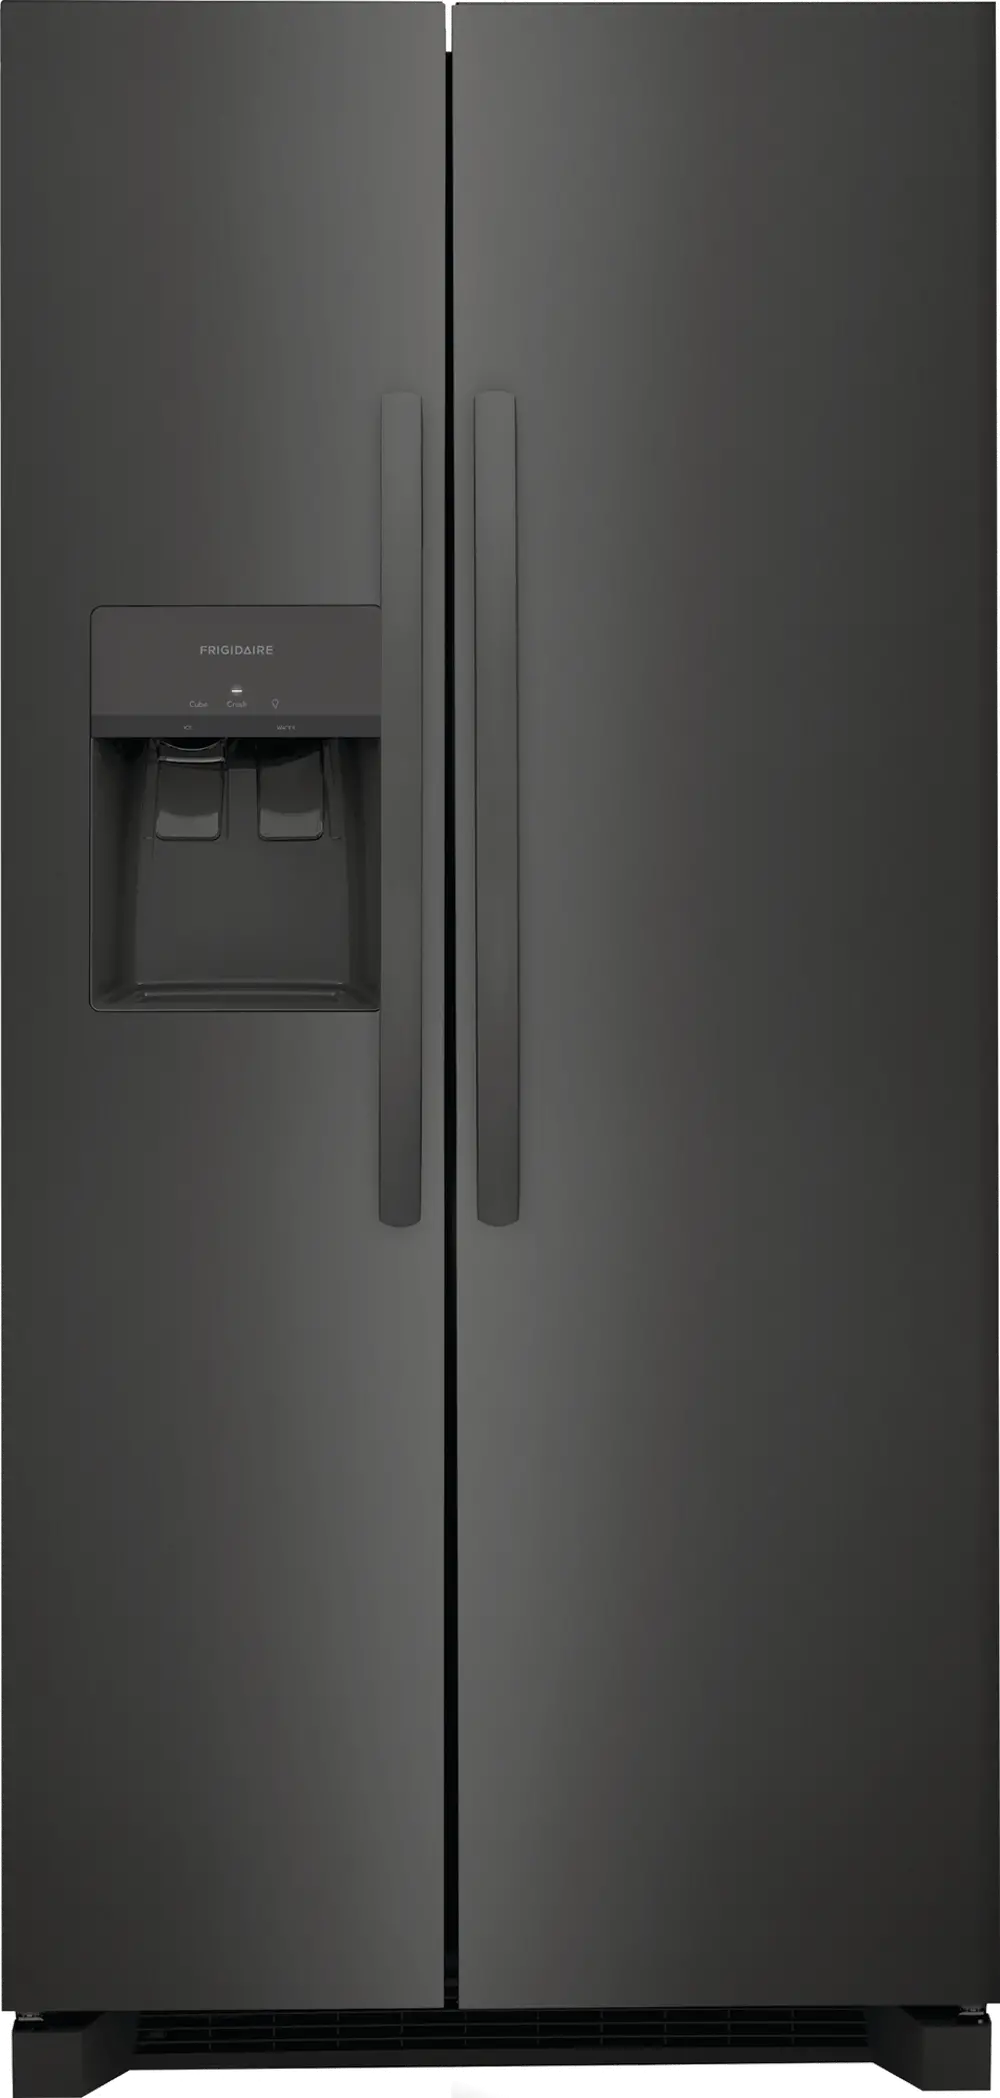 FRSS2323AD Frigidaire 22.3 cu ft Side by Side Refrigerator - 33 W Black Stainless Steel-1